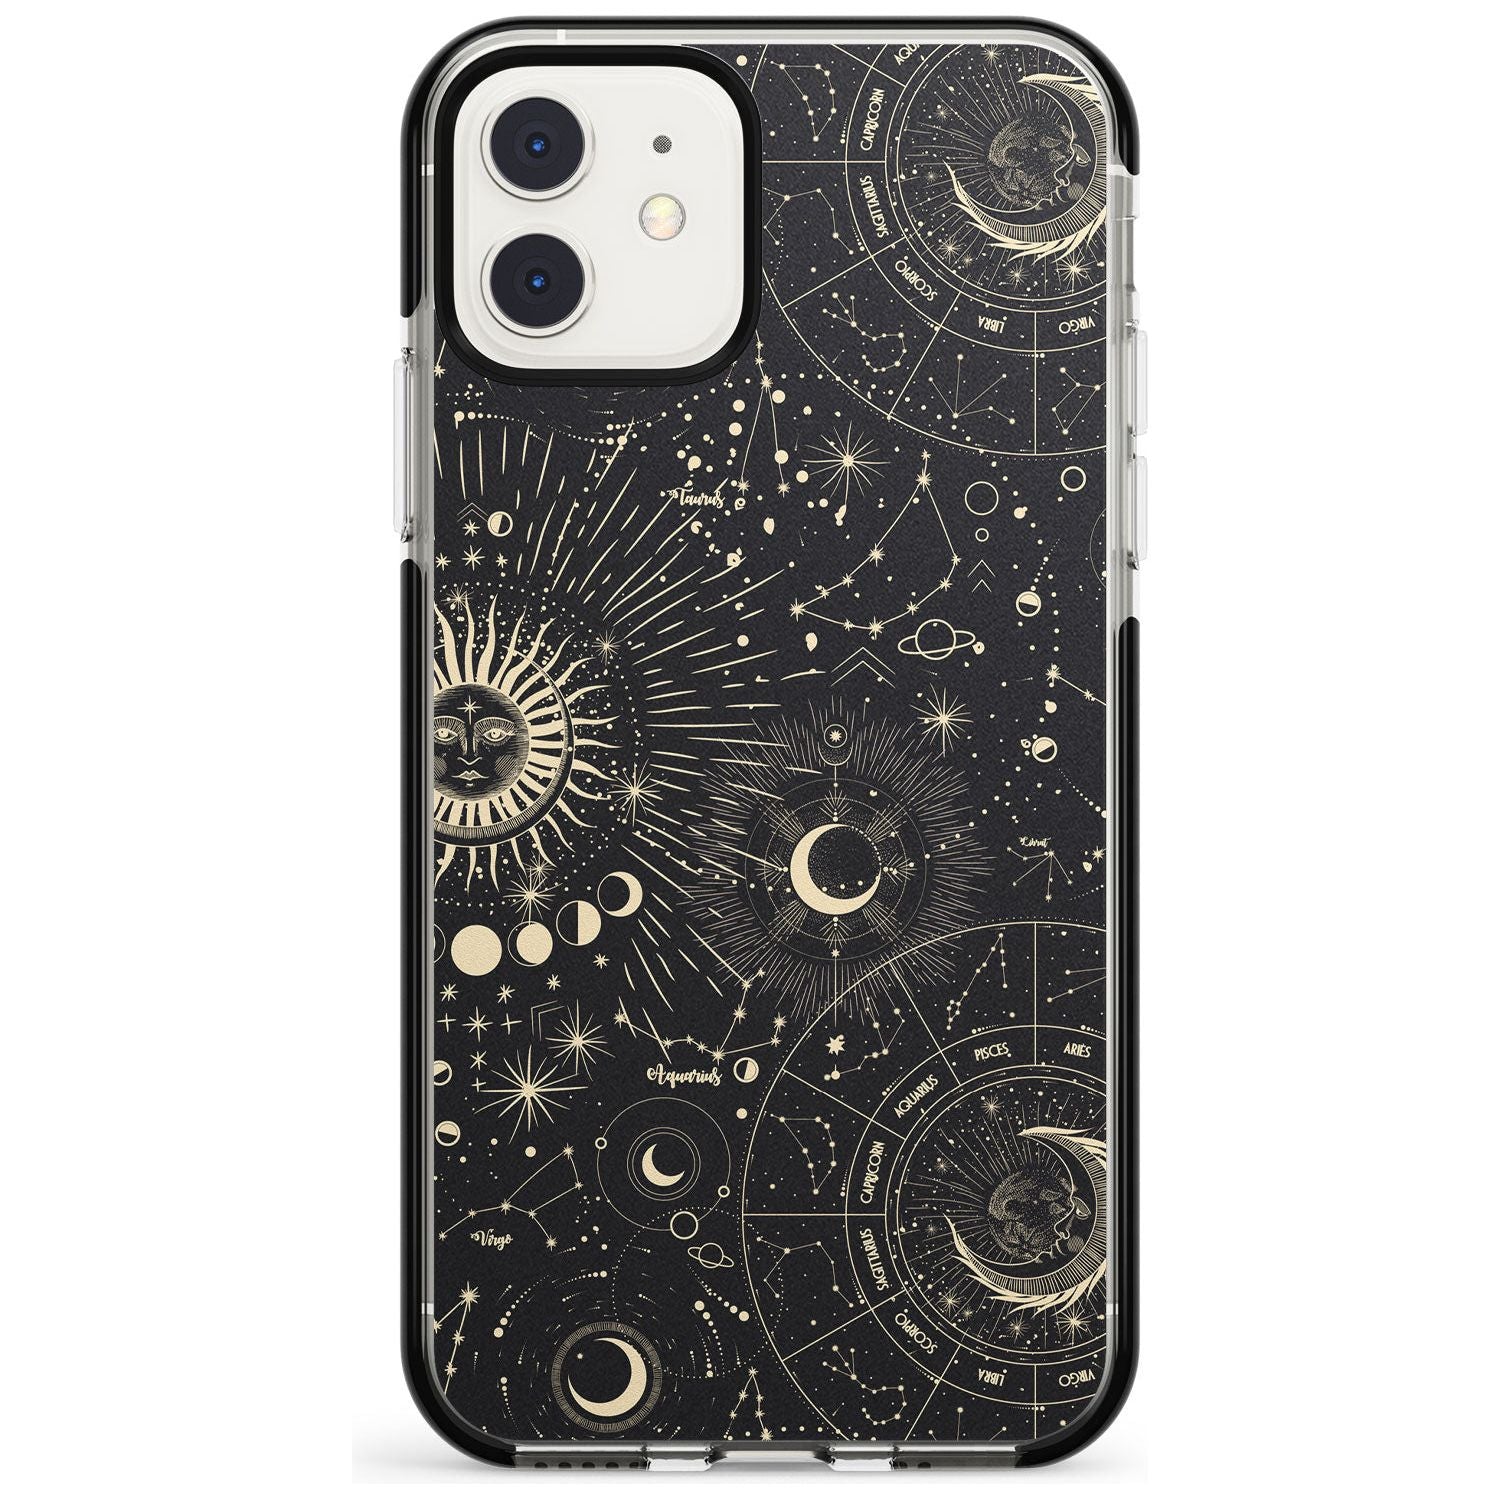 Suns & Zodiac Charts Pink Fade Impact Phone Case for iPhone 11 Pro Max